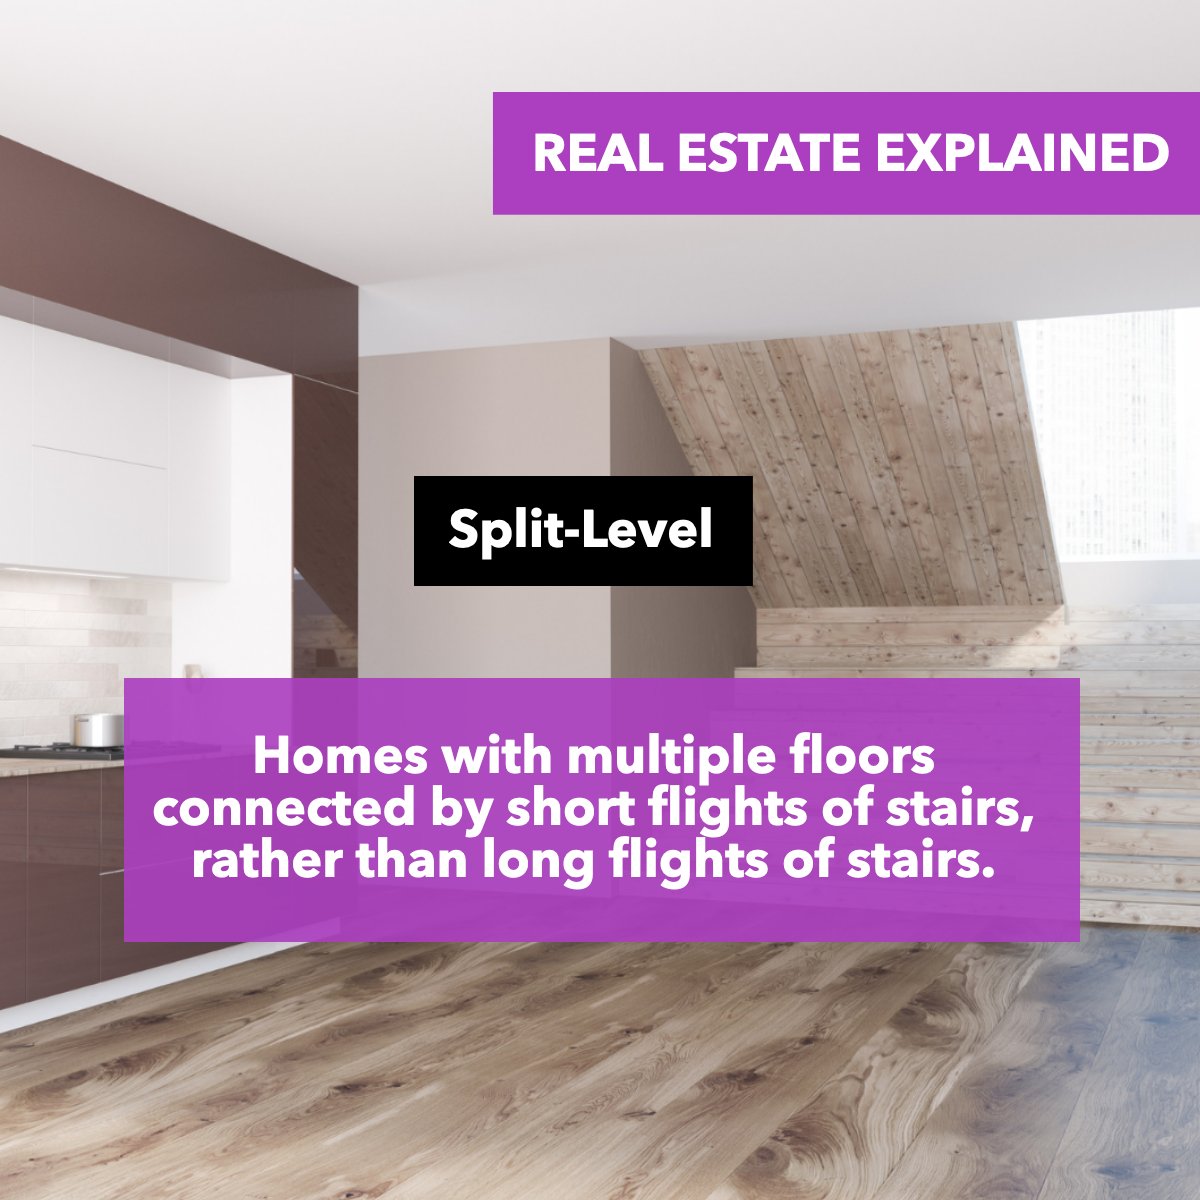 Did you know what a Spit-Level is? 🤔

Is this the type of house that you like?

#splitlevelremodel   #splitlevelhome   #splitleveldesign
#BorahRealtySource #Borahsdiditagain #Borahsoldit #bestteamintown #6788737018 #HouseHunting #Newhome #Broker